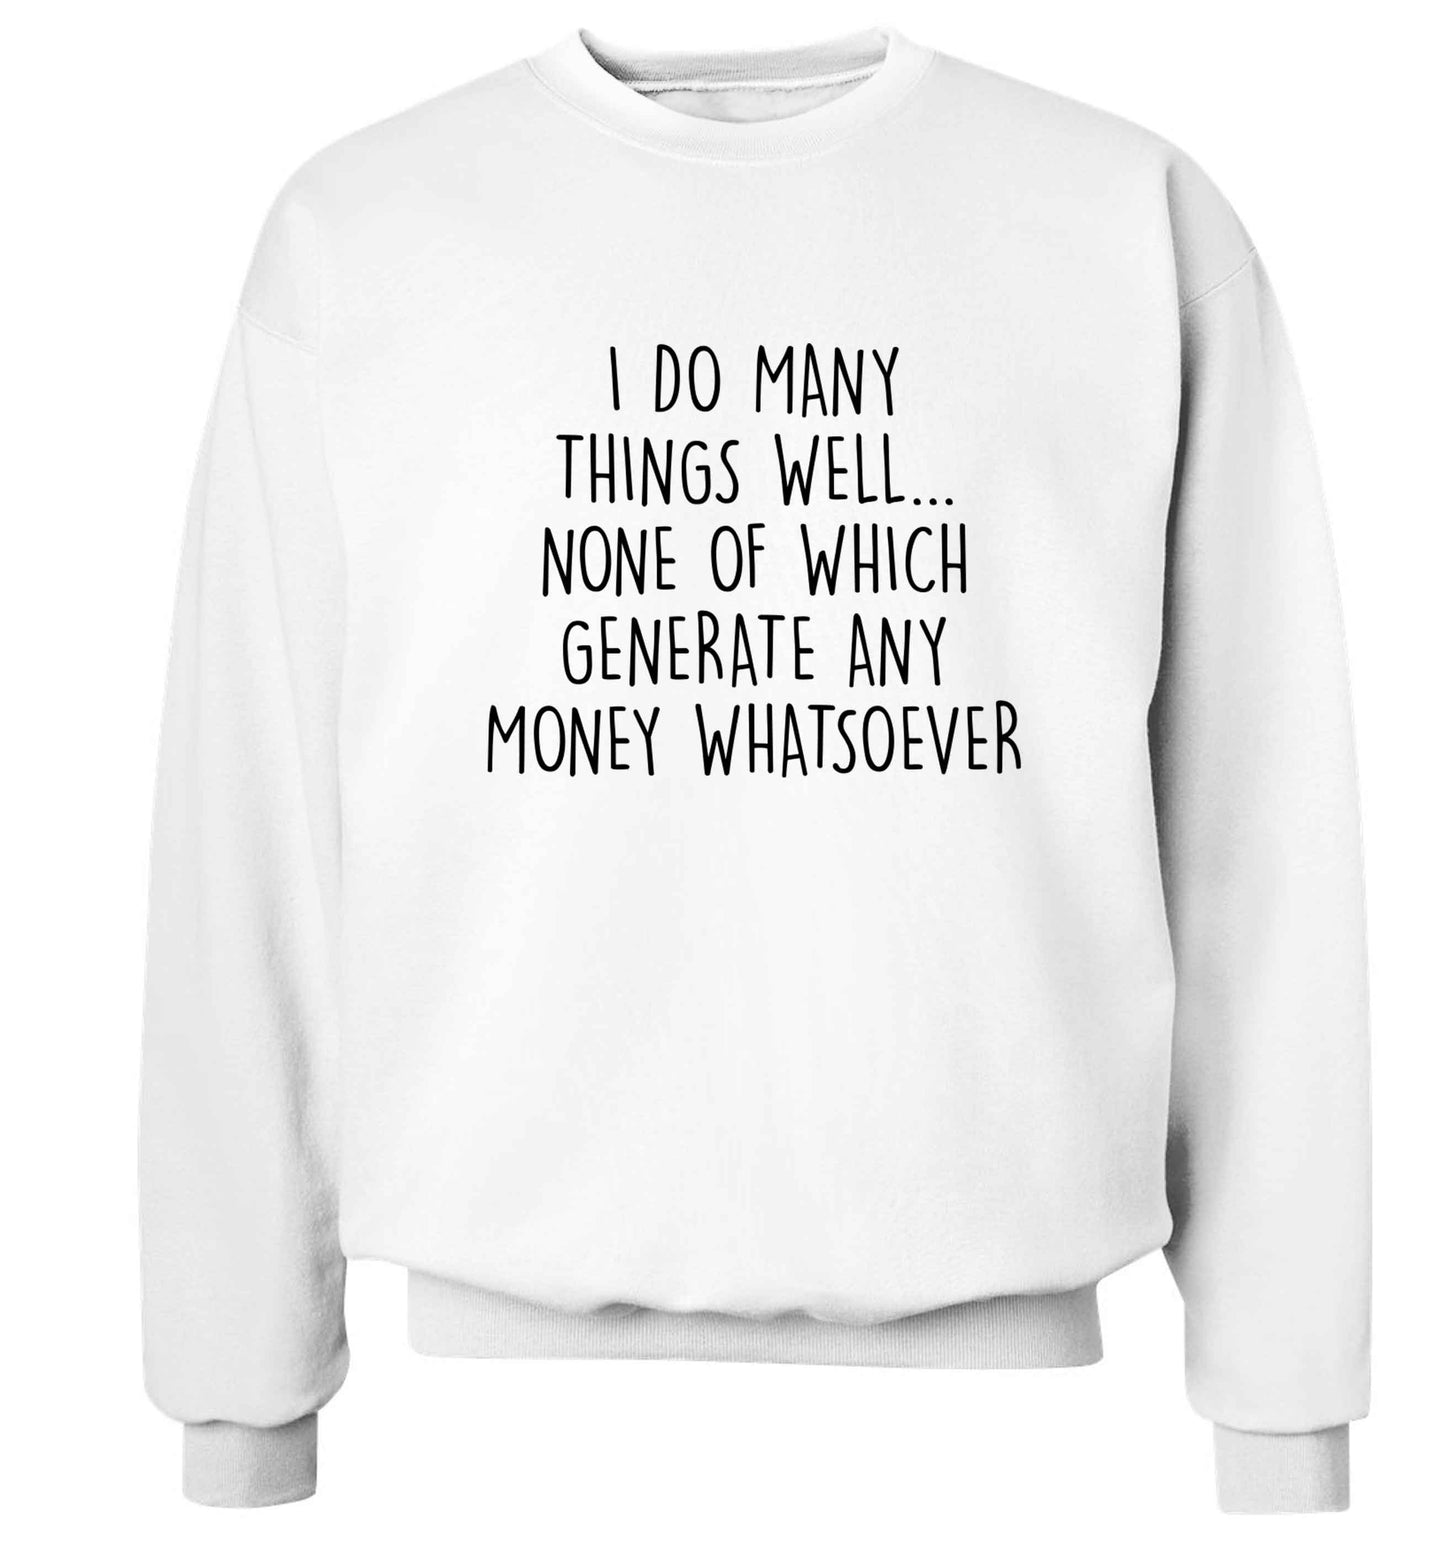 I do many things well none of which generate income Adult's unisex white Sweater 2XL